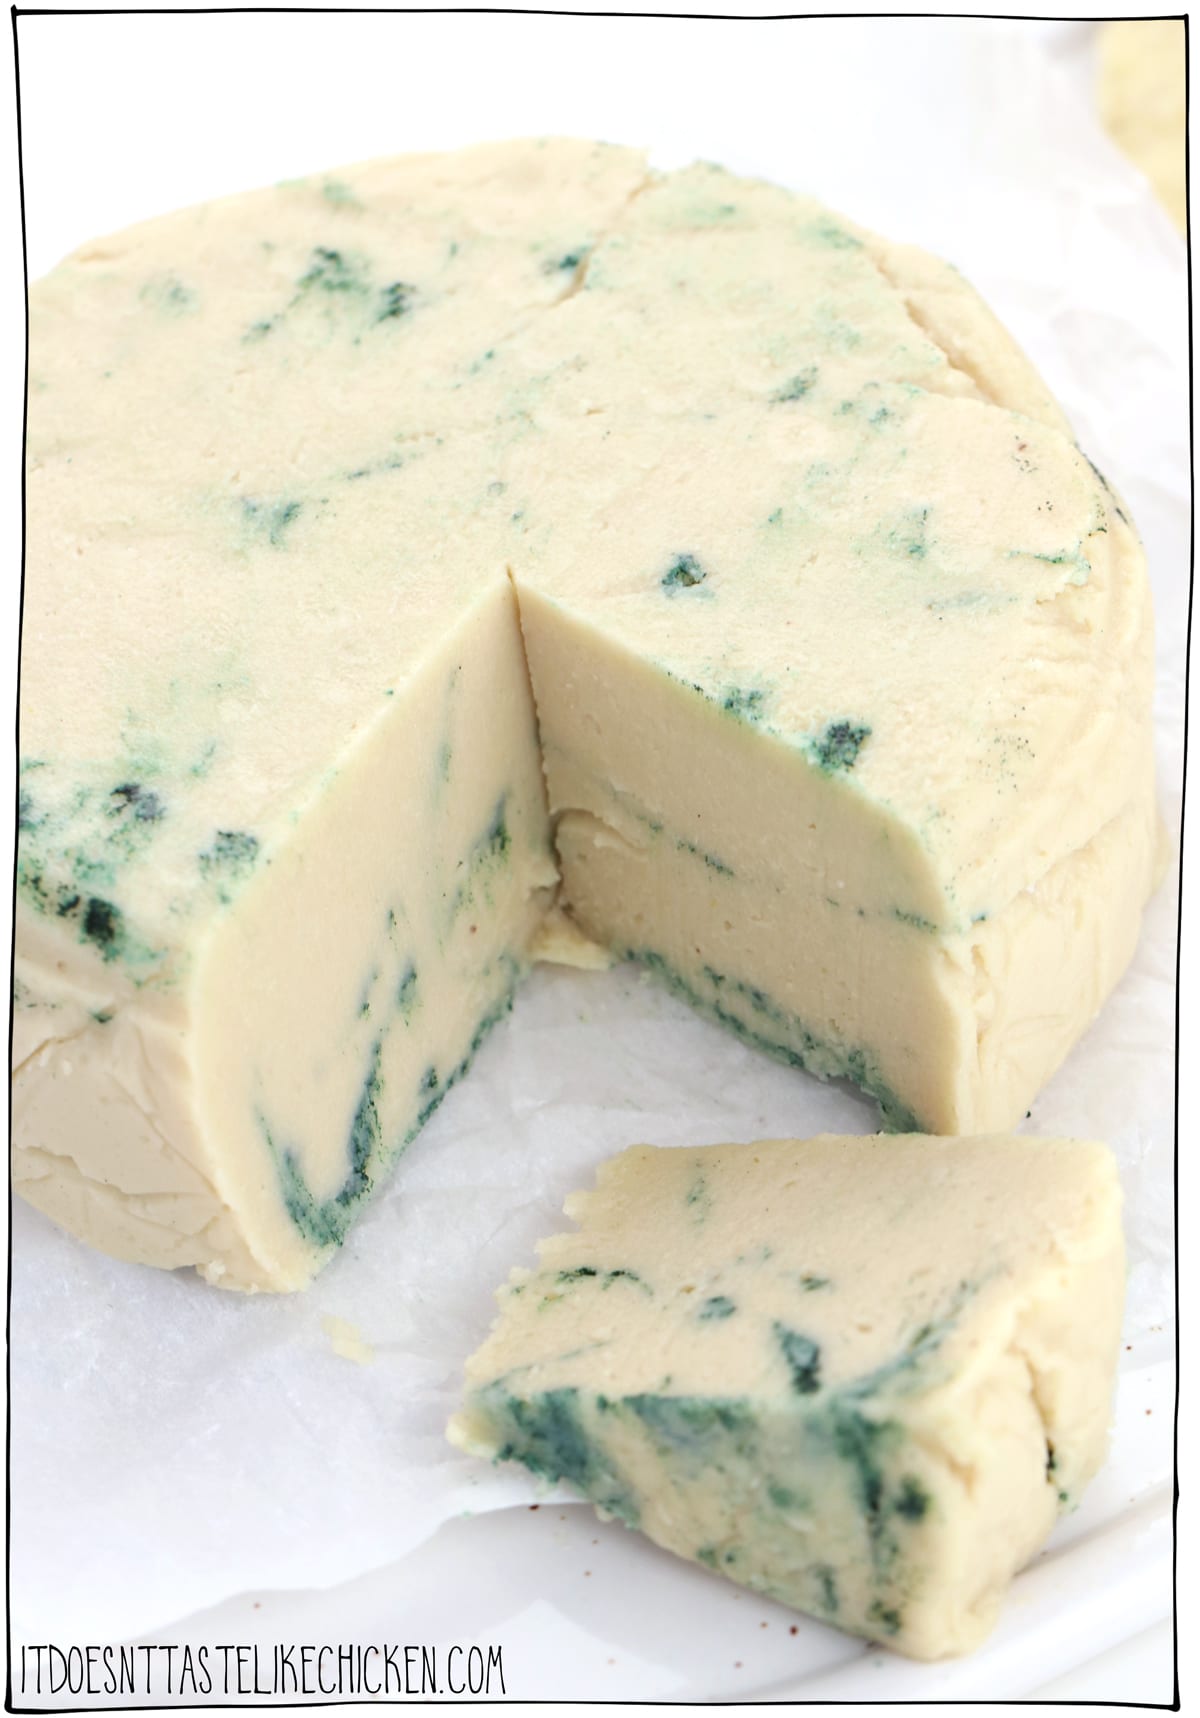 Easy Vegan Blue Cheese Recipe! Just 8 ingredients, 20 minutes to make (plus chilling time), and you can make your own homemade vegan blue cheese! This dairy-free cheese is creamy, tangy, got that funky kick to it, and even has the pretty green and blue veins throughout. #itdoesnttastelikechicken #veganrecipes #vegancheese